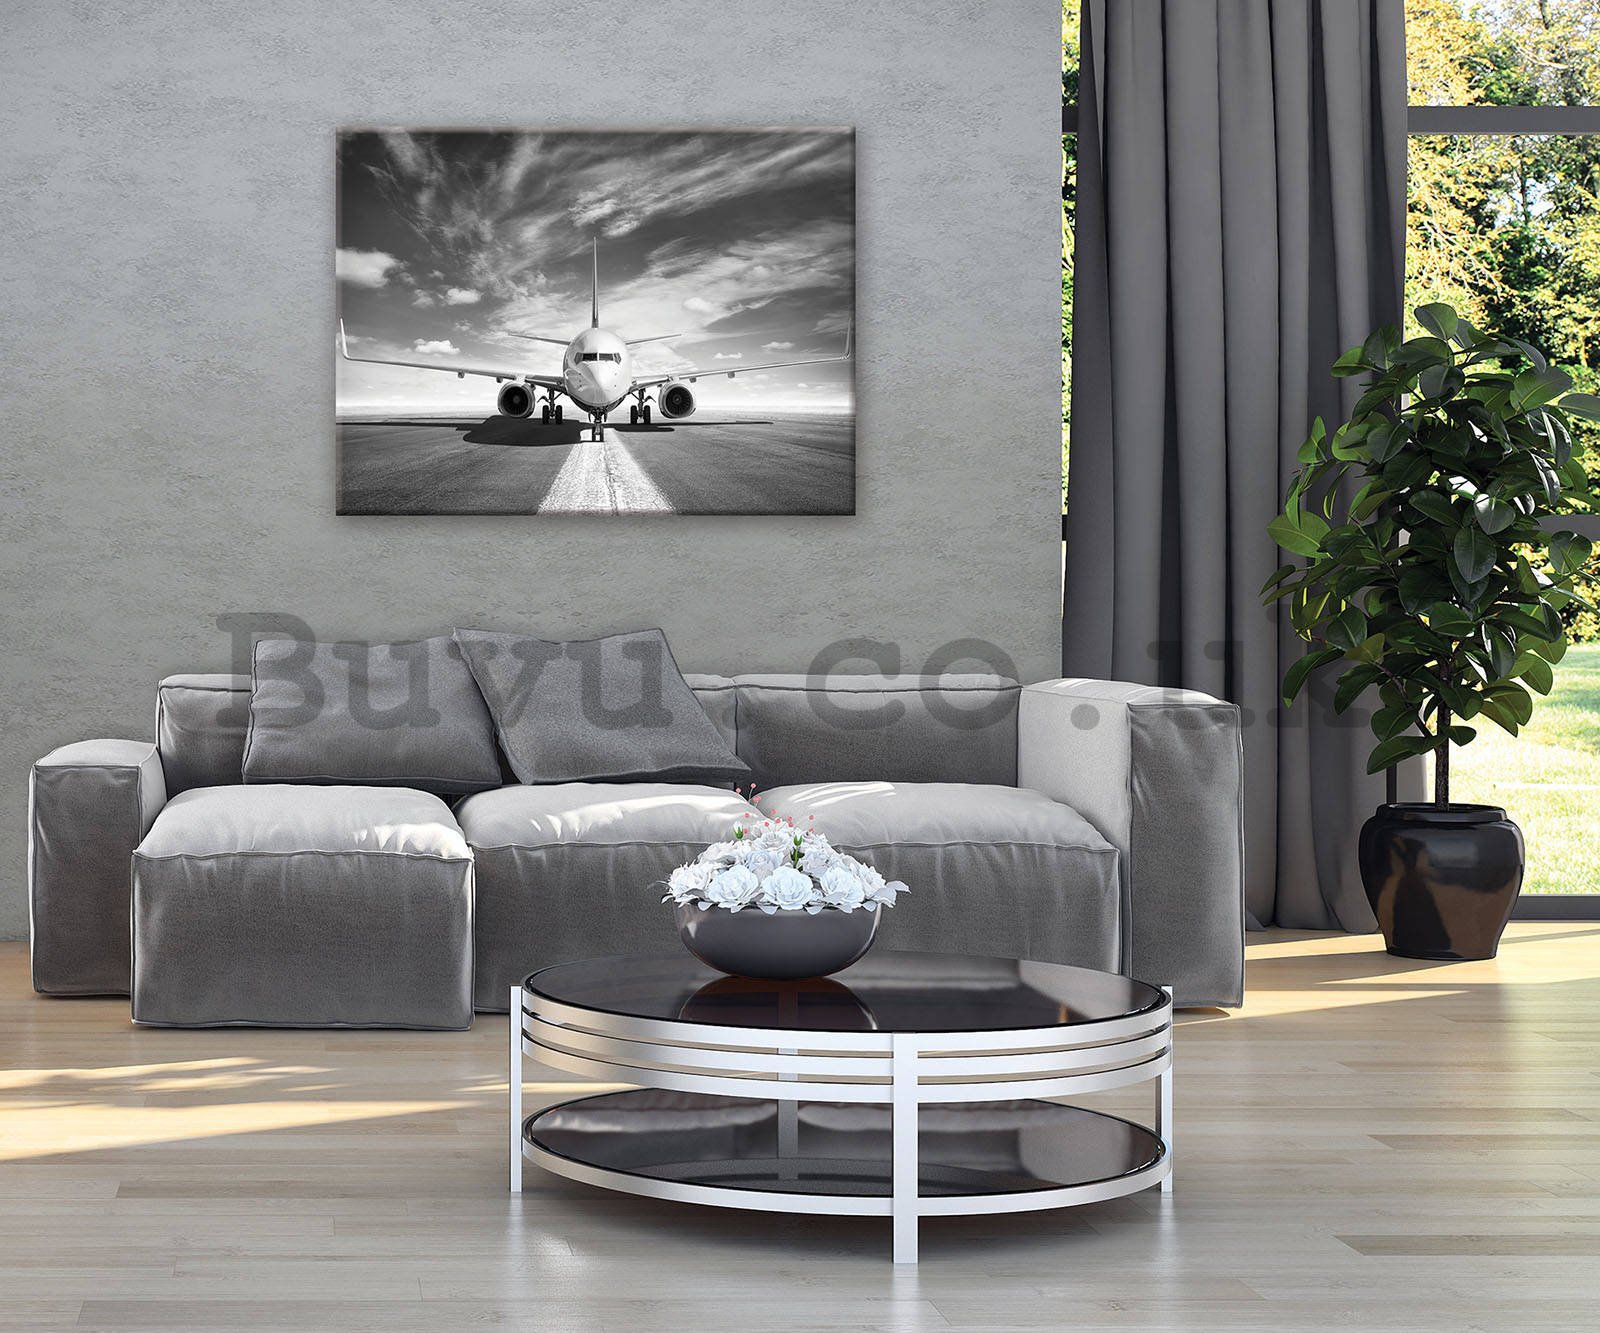 Painting on canvas: Airplane (black and white) - 80x60 cm